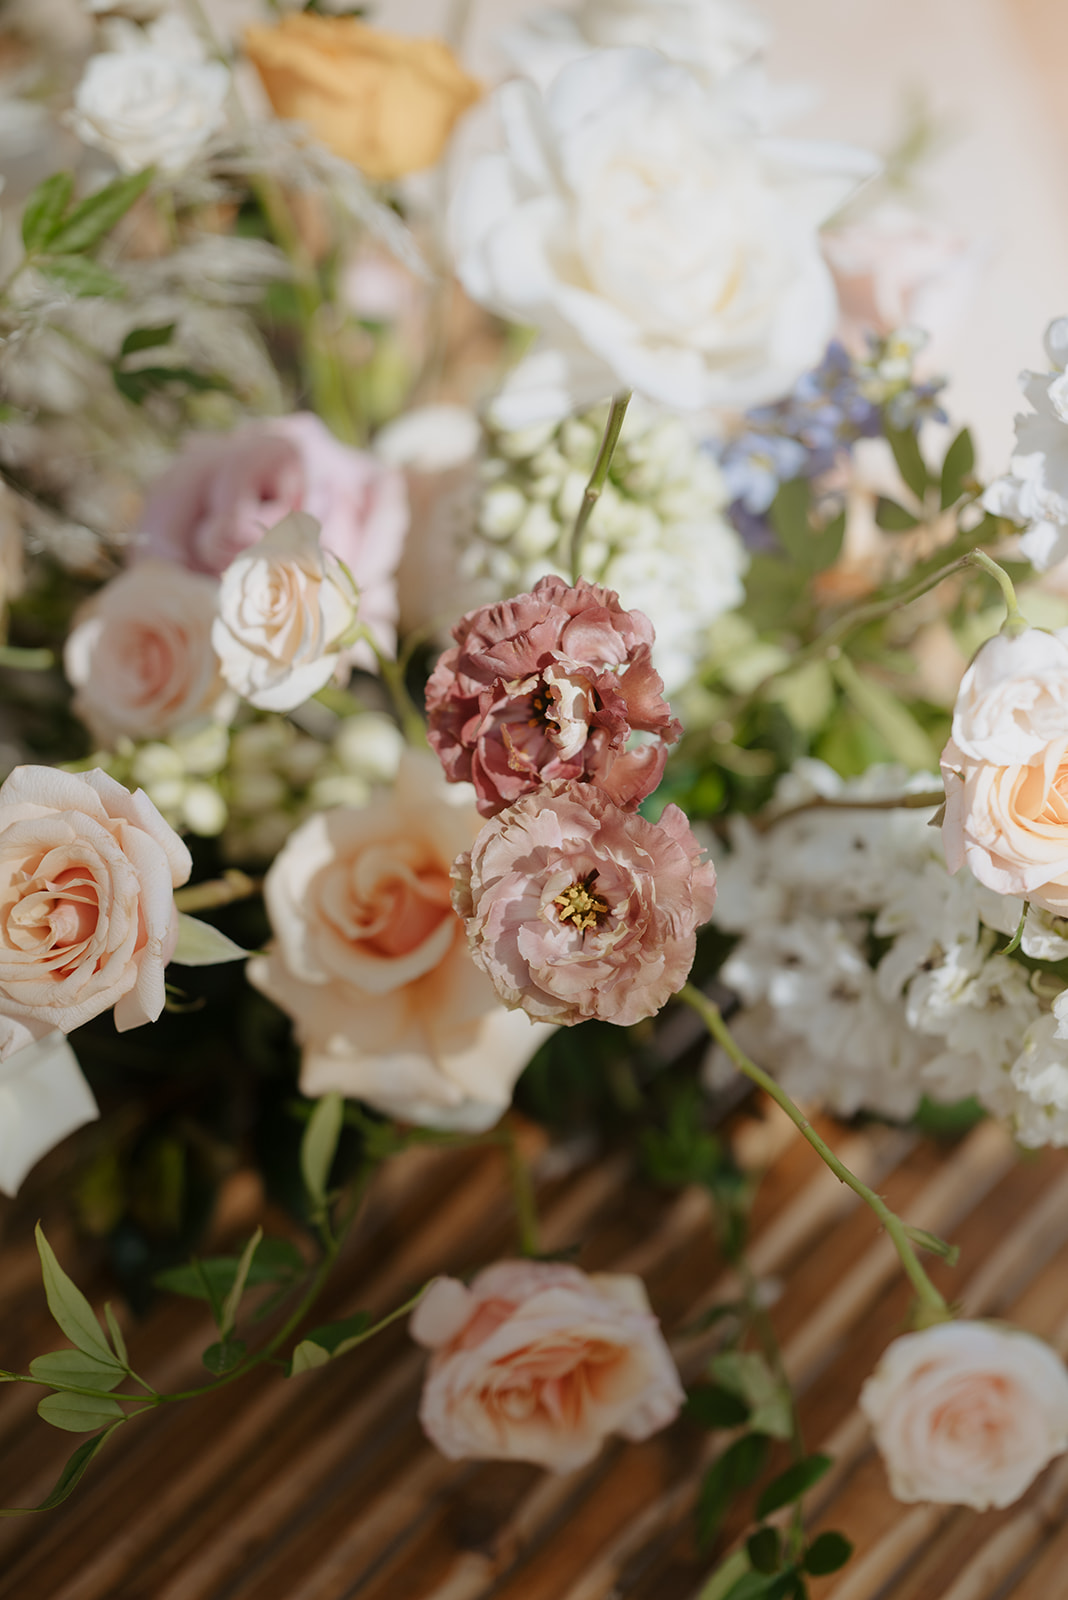 Wedding flowers from Pure Love Design